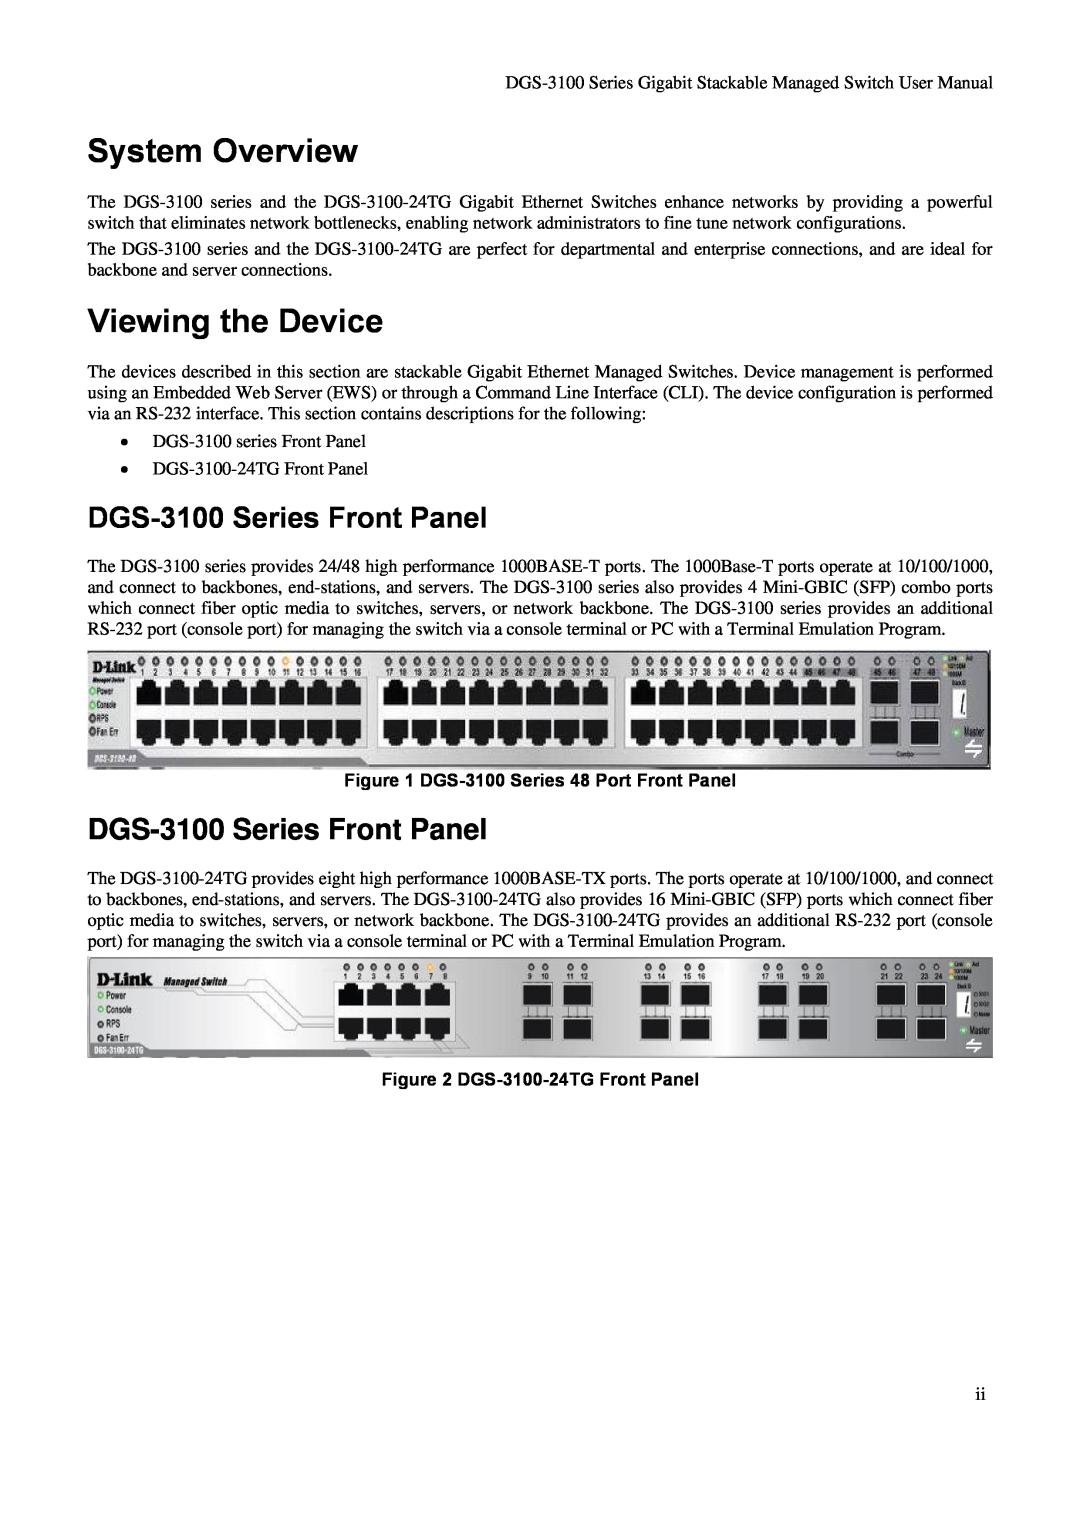 D-Link user manual System Overview, Viewing the Device, DGS-3100 Series Front Panel, DGS-3100 Series 48 Port Front Panel 